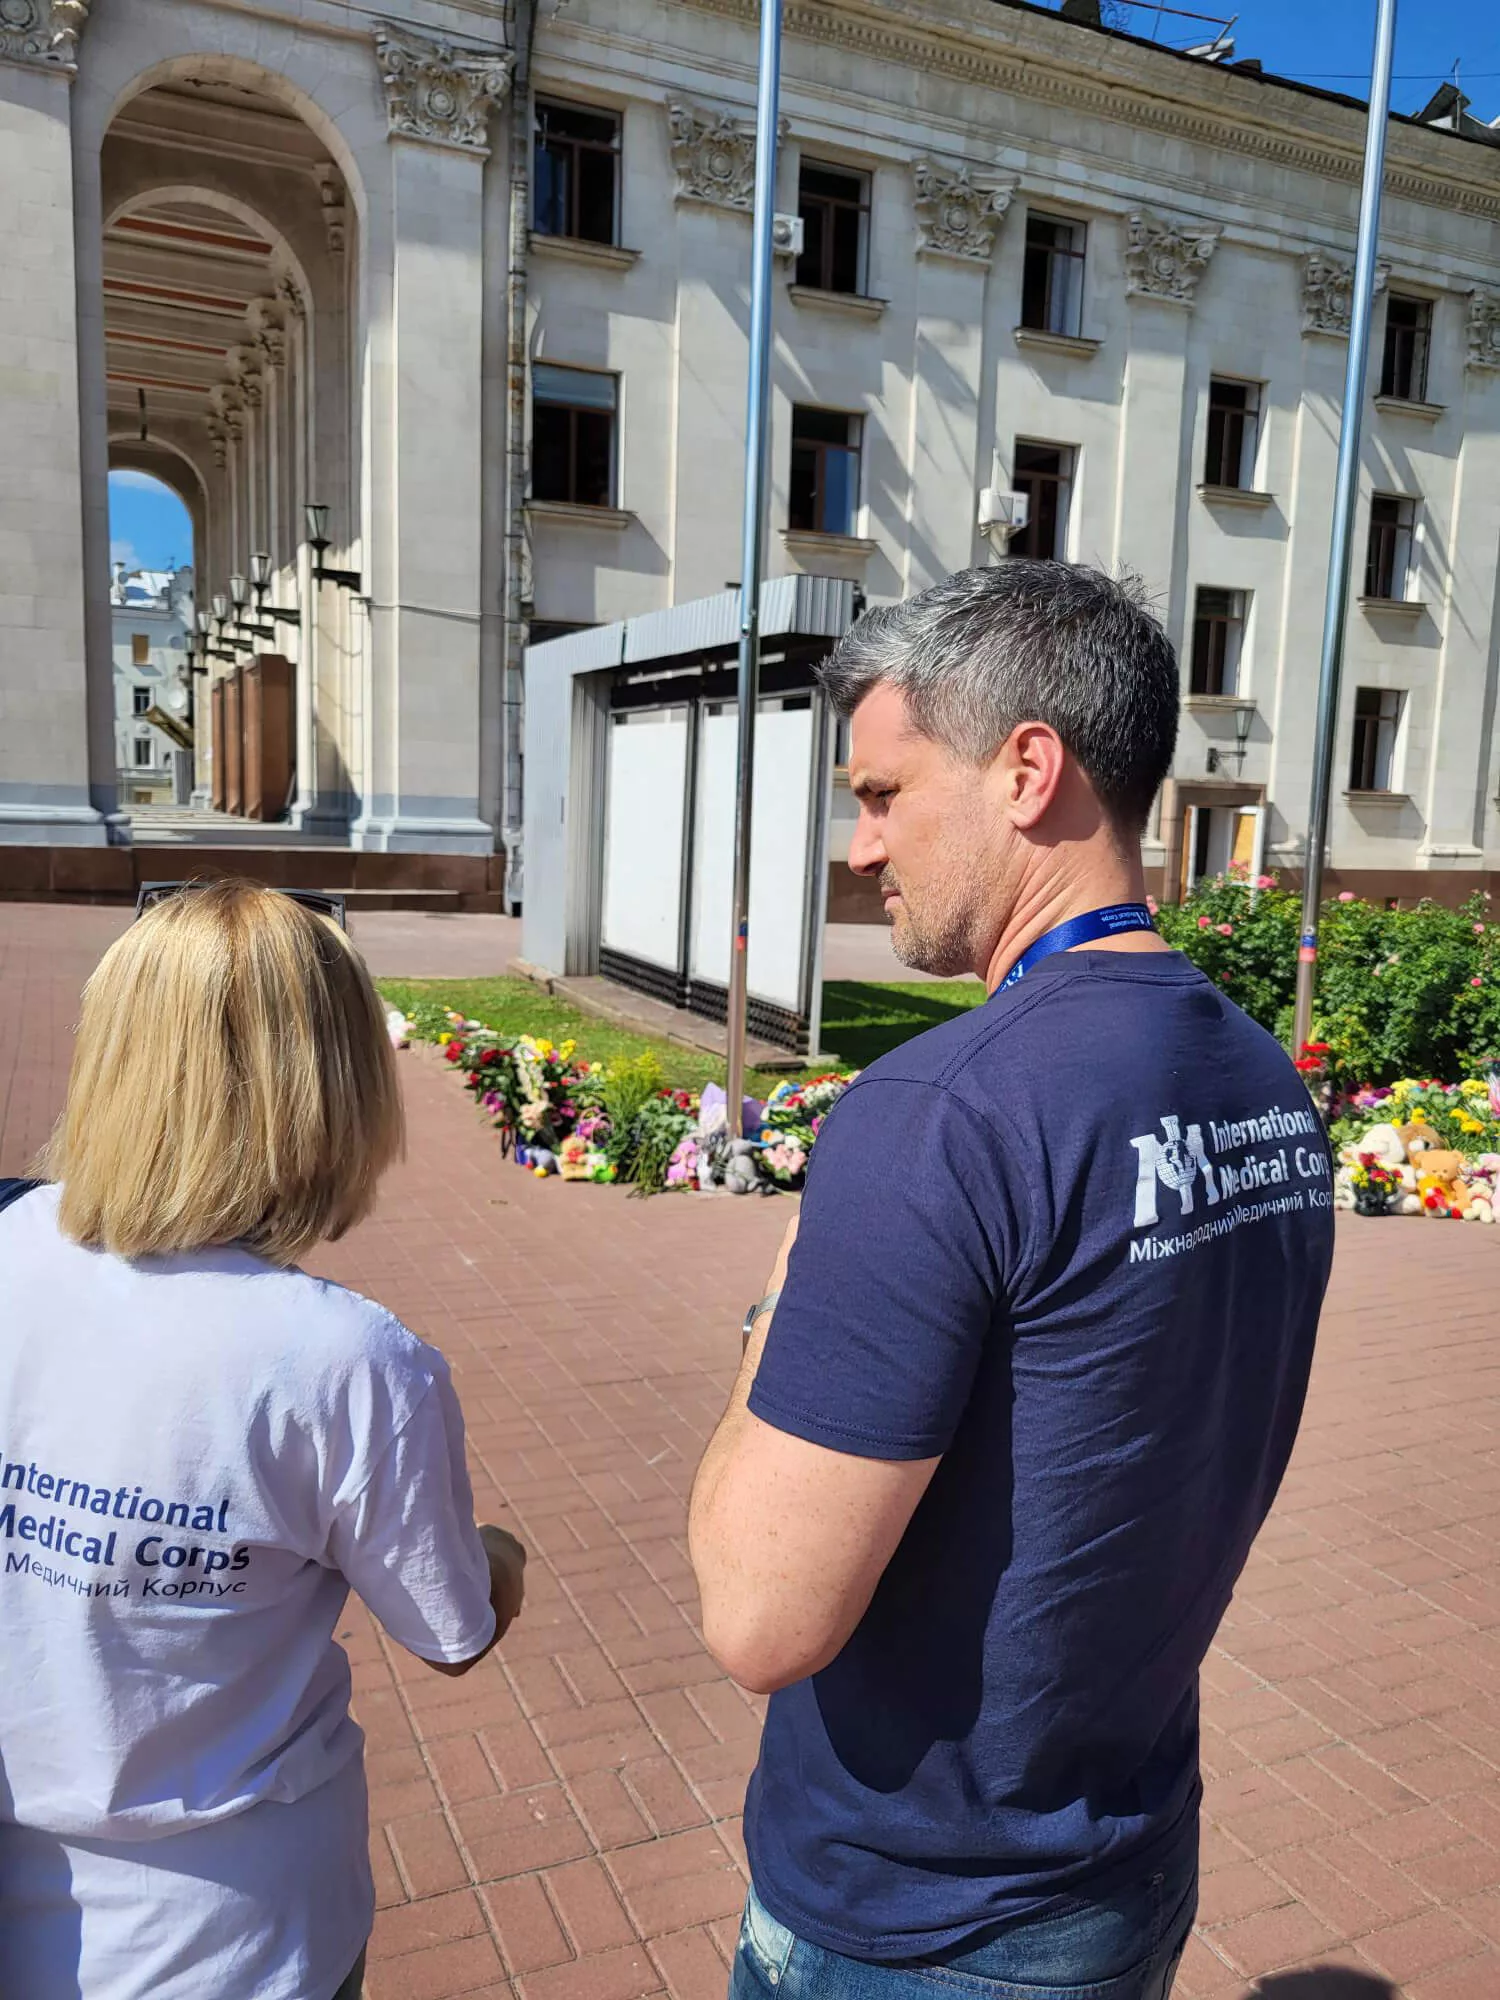 Our Ukraine Program Manager (left) and Country Director(right) speak outside of a theater that was attacked.